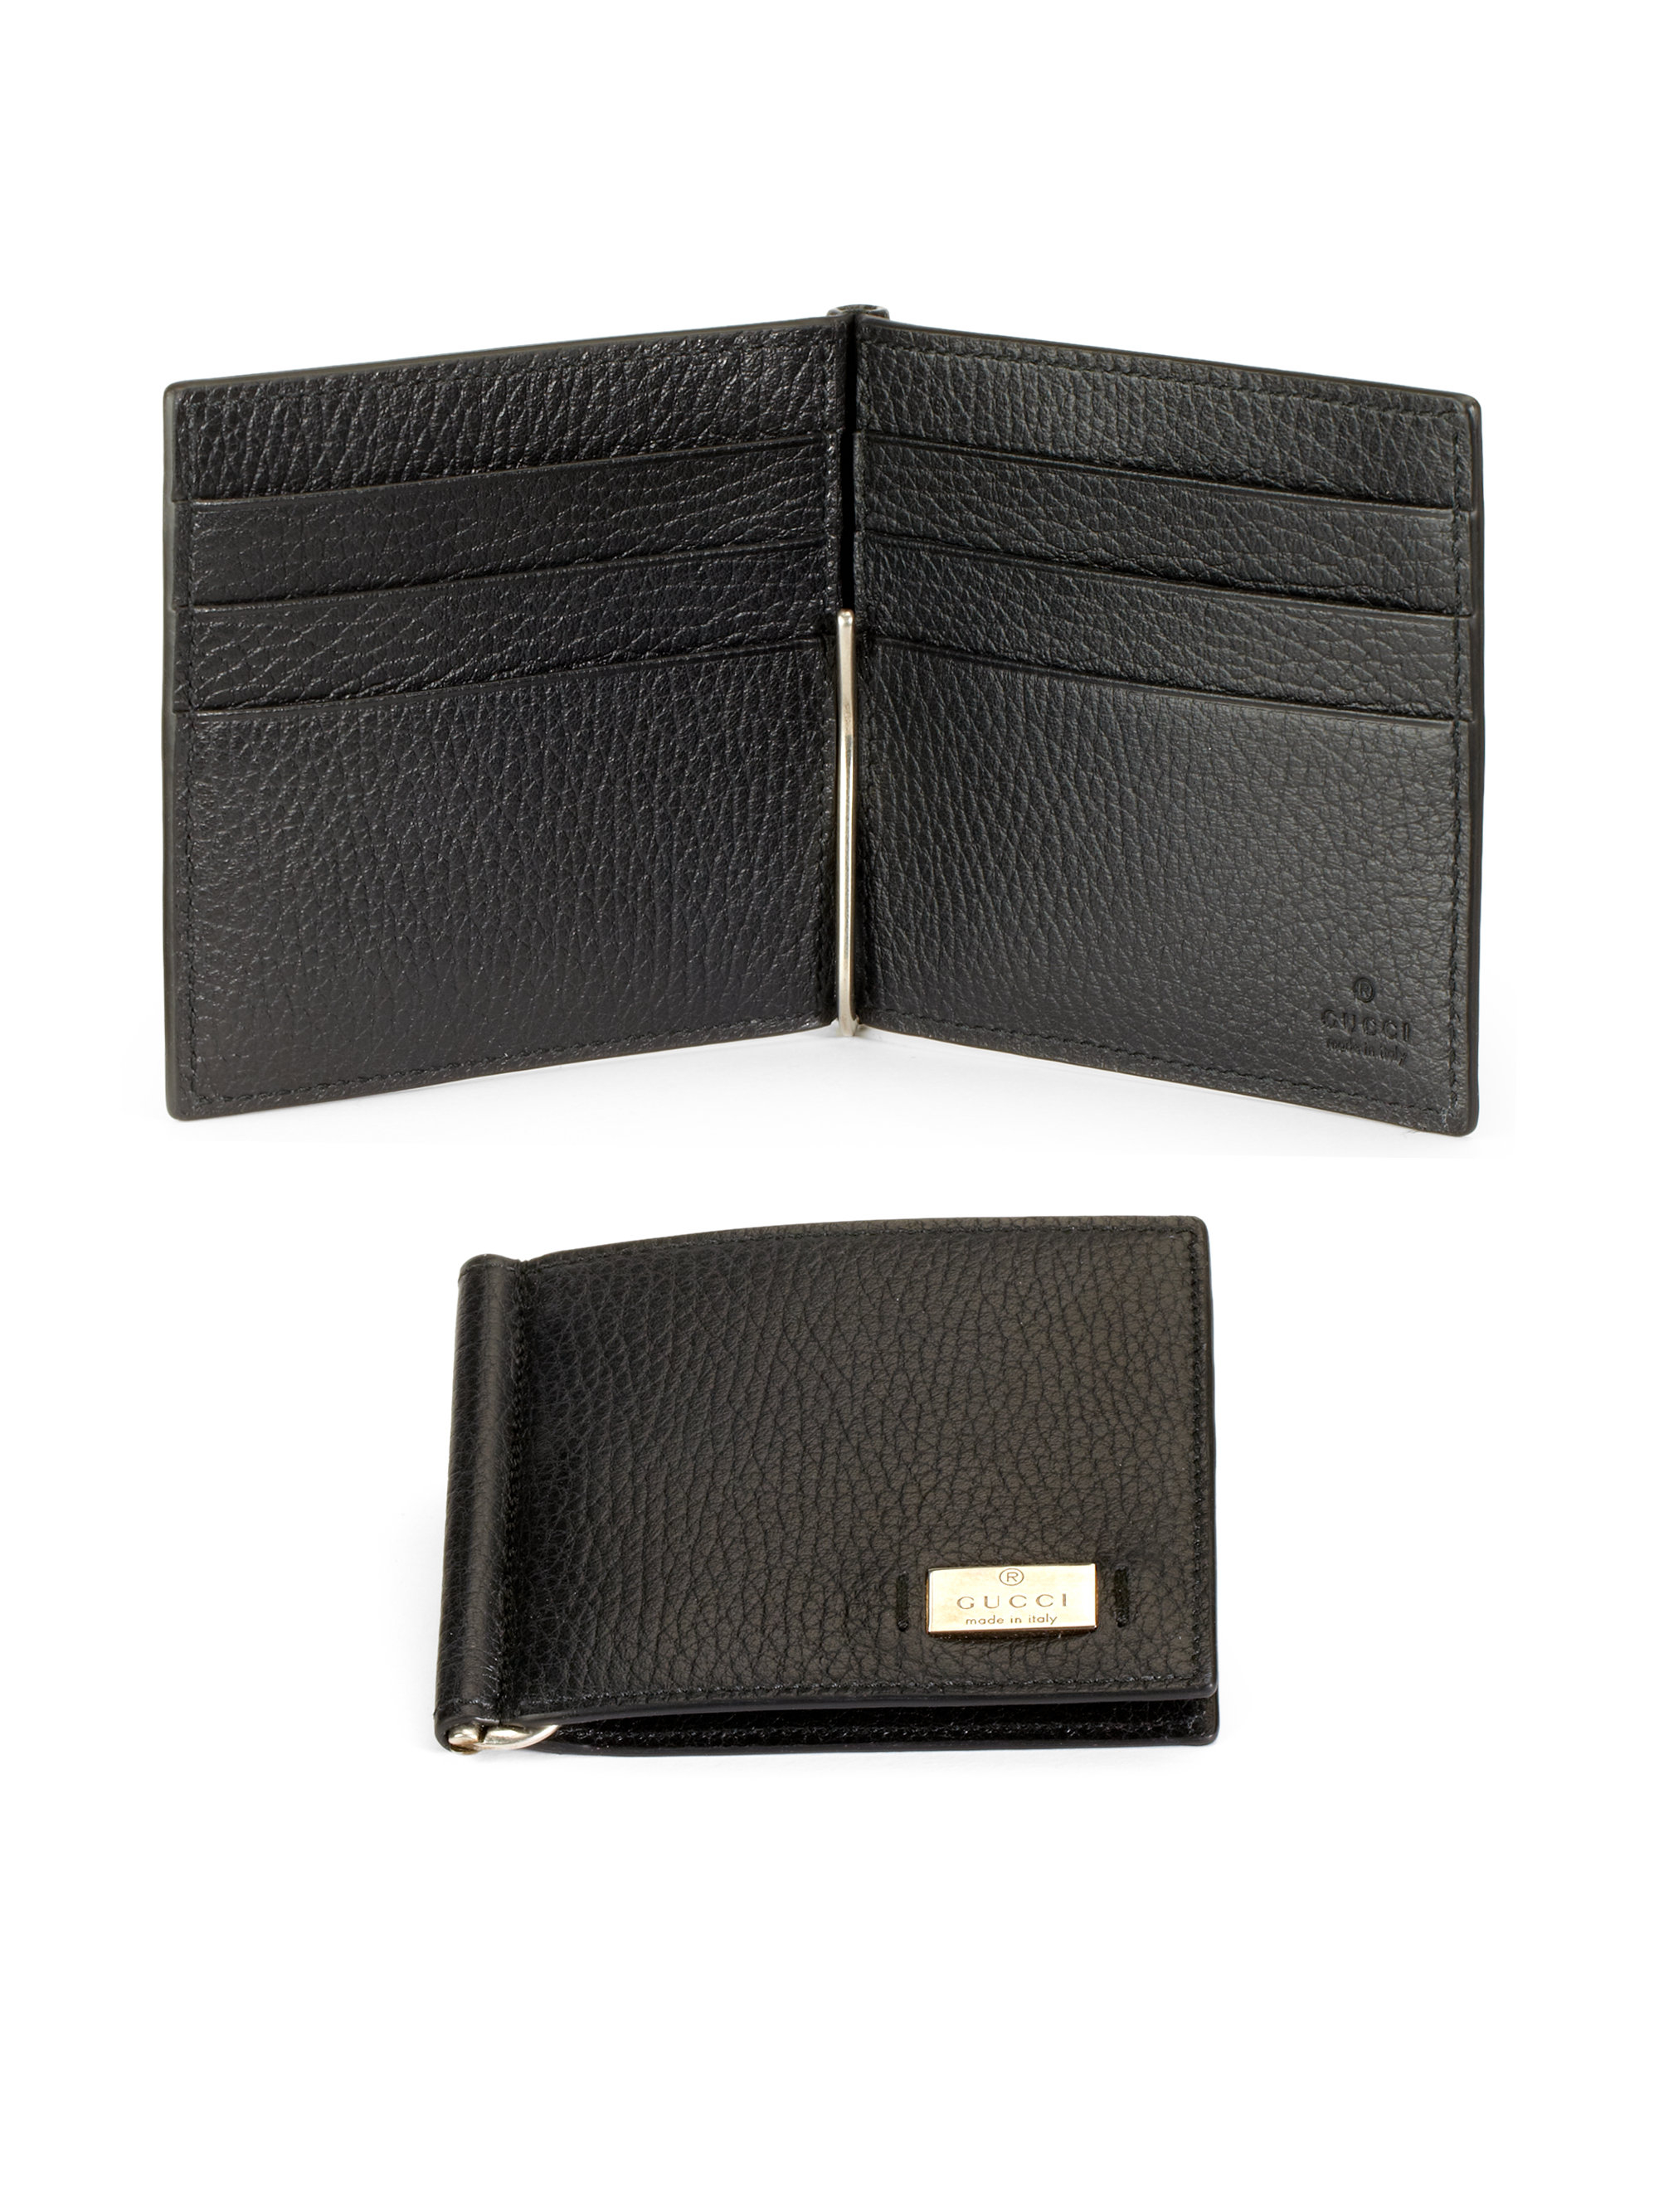 Gucci Leather Money Clip Wallet in Black for Men | Lyst